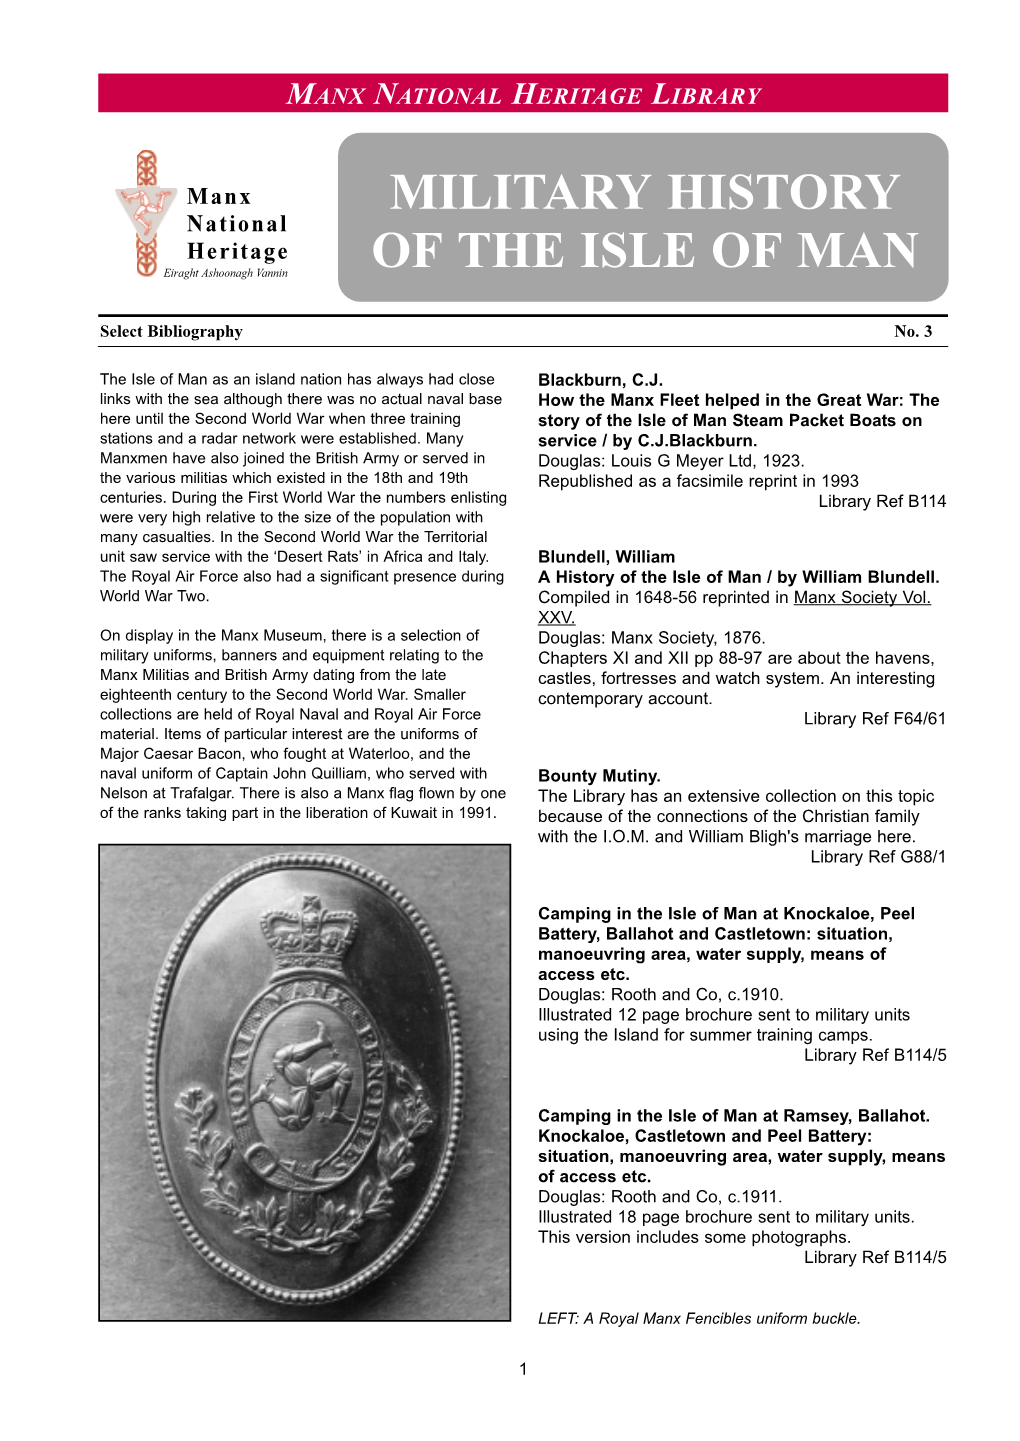 Military History of the Isle of Man